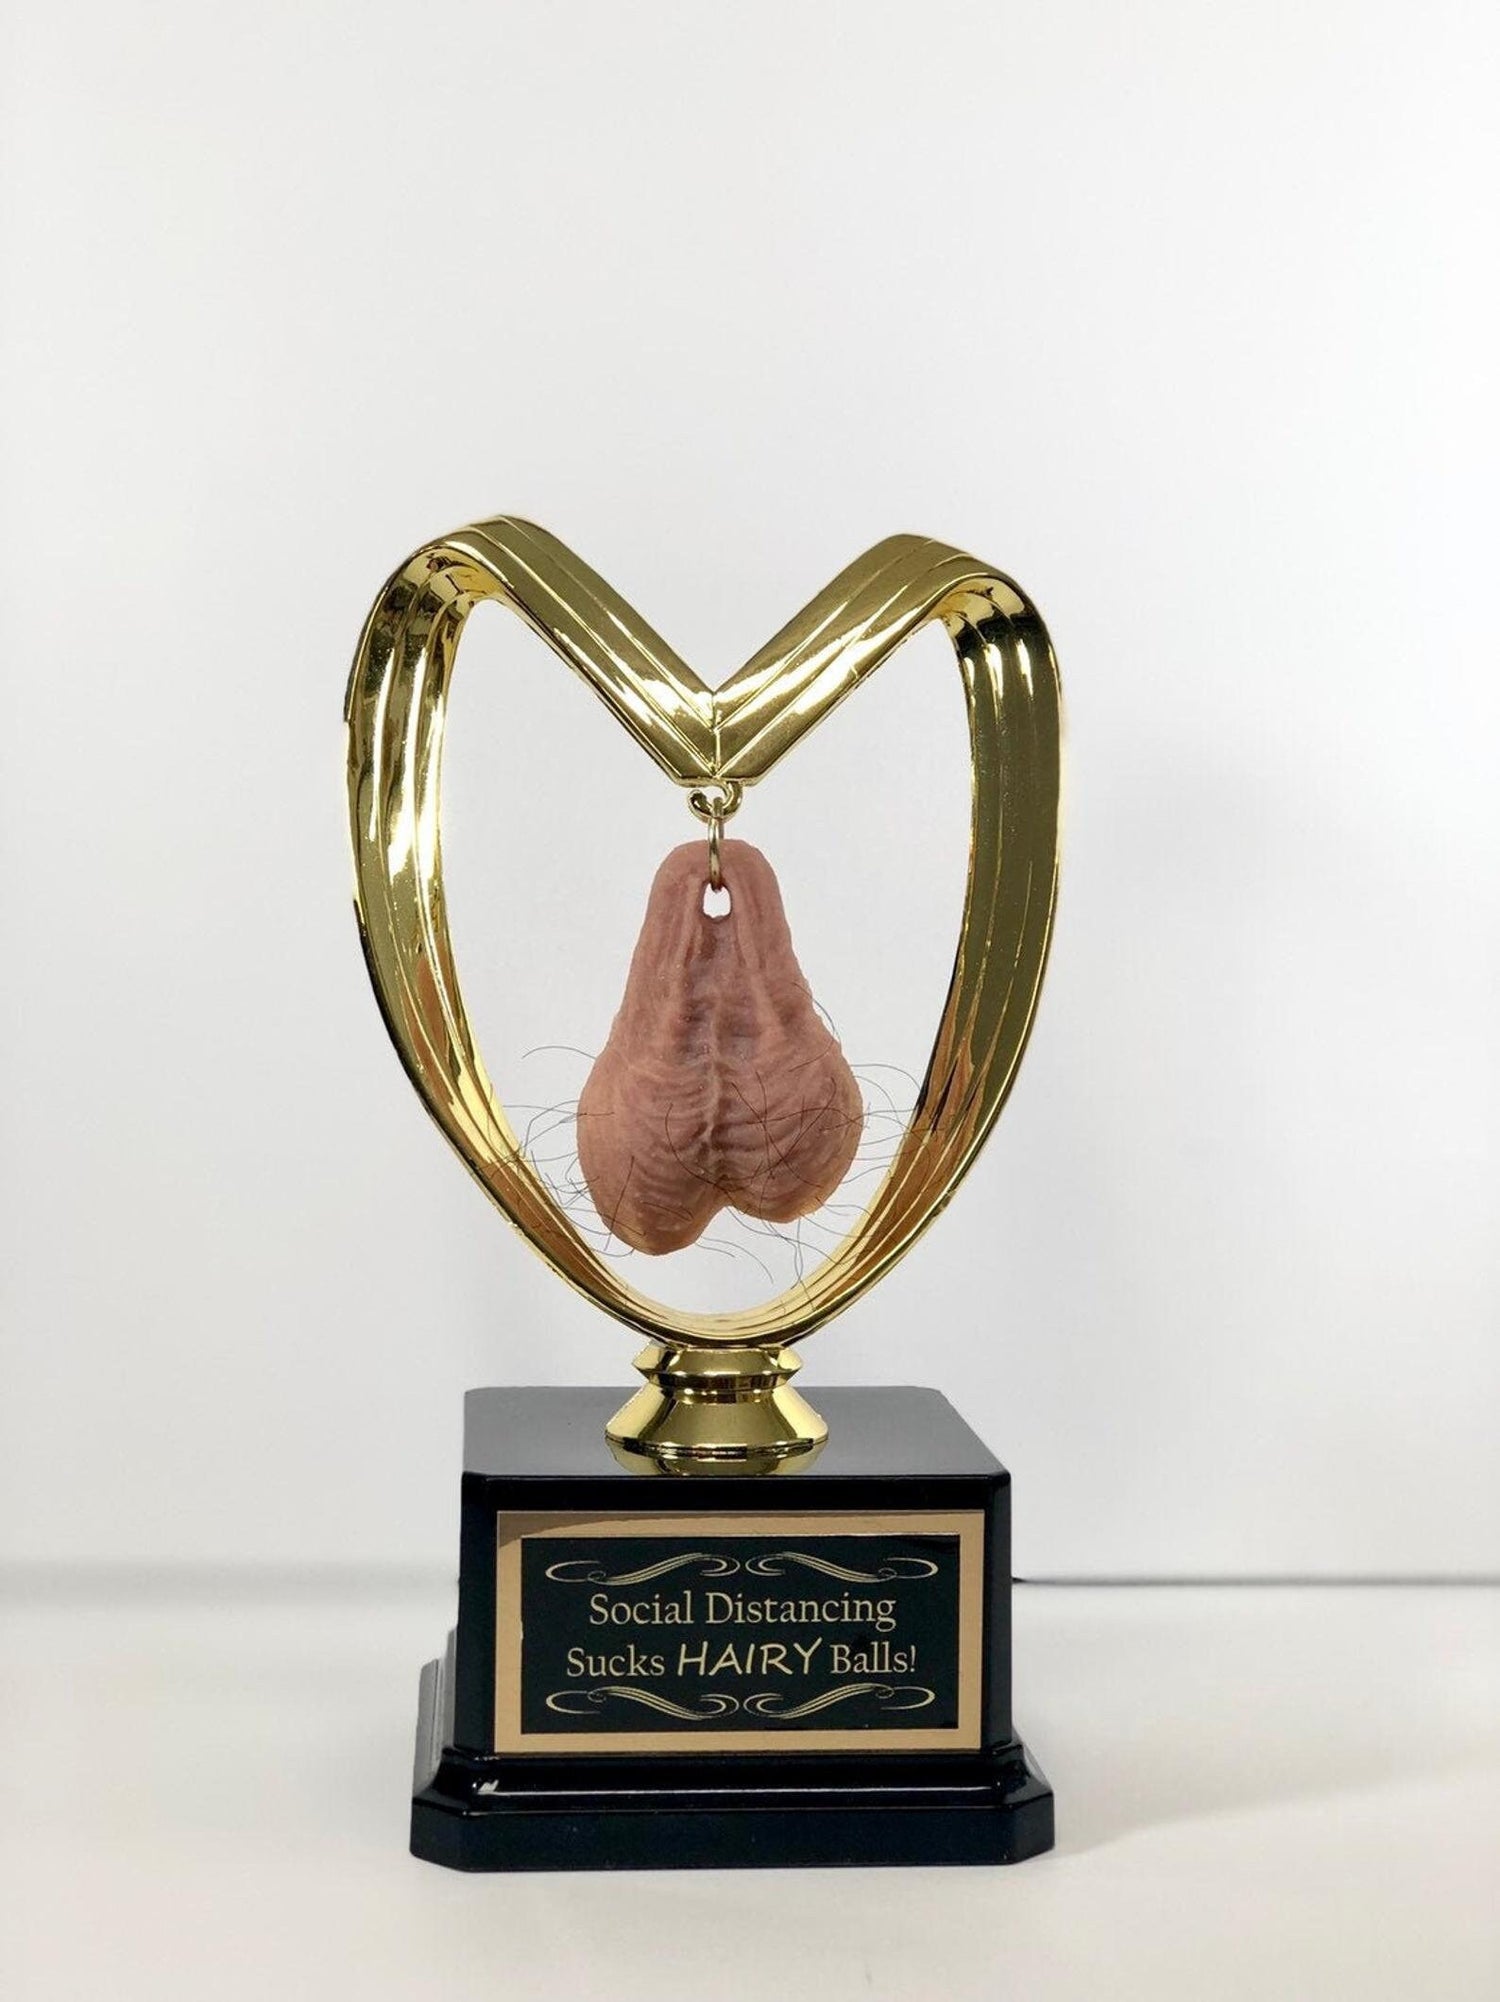 You Suck Balls Golf Trophy Balls Trophy Funny Trophy Birthday Father's Day Gag Gift Loser Last Place You've Got Balls Adult Humor Testicle